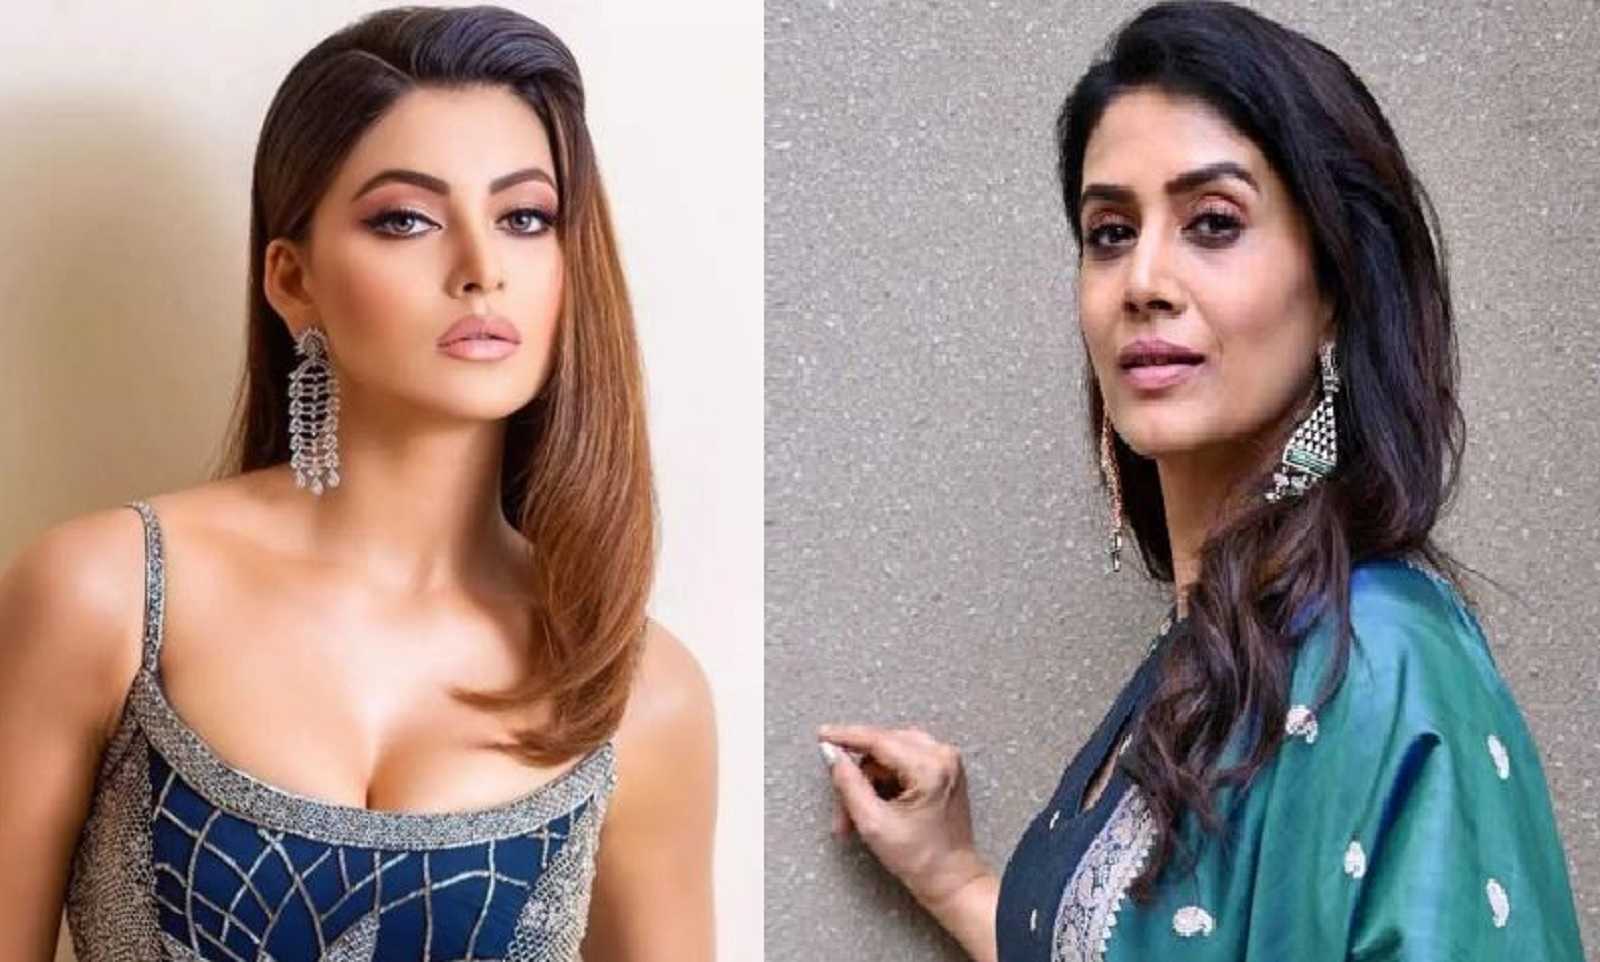 Urvashi Rautela brags about her achievements while reacting to Sonali Kulkarni's controversial statement 'women are lazy'